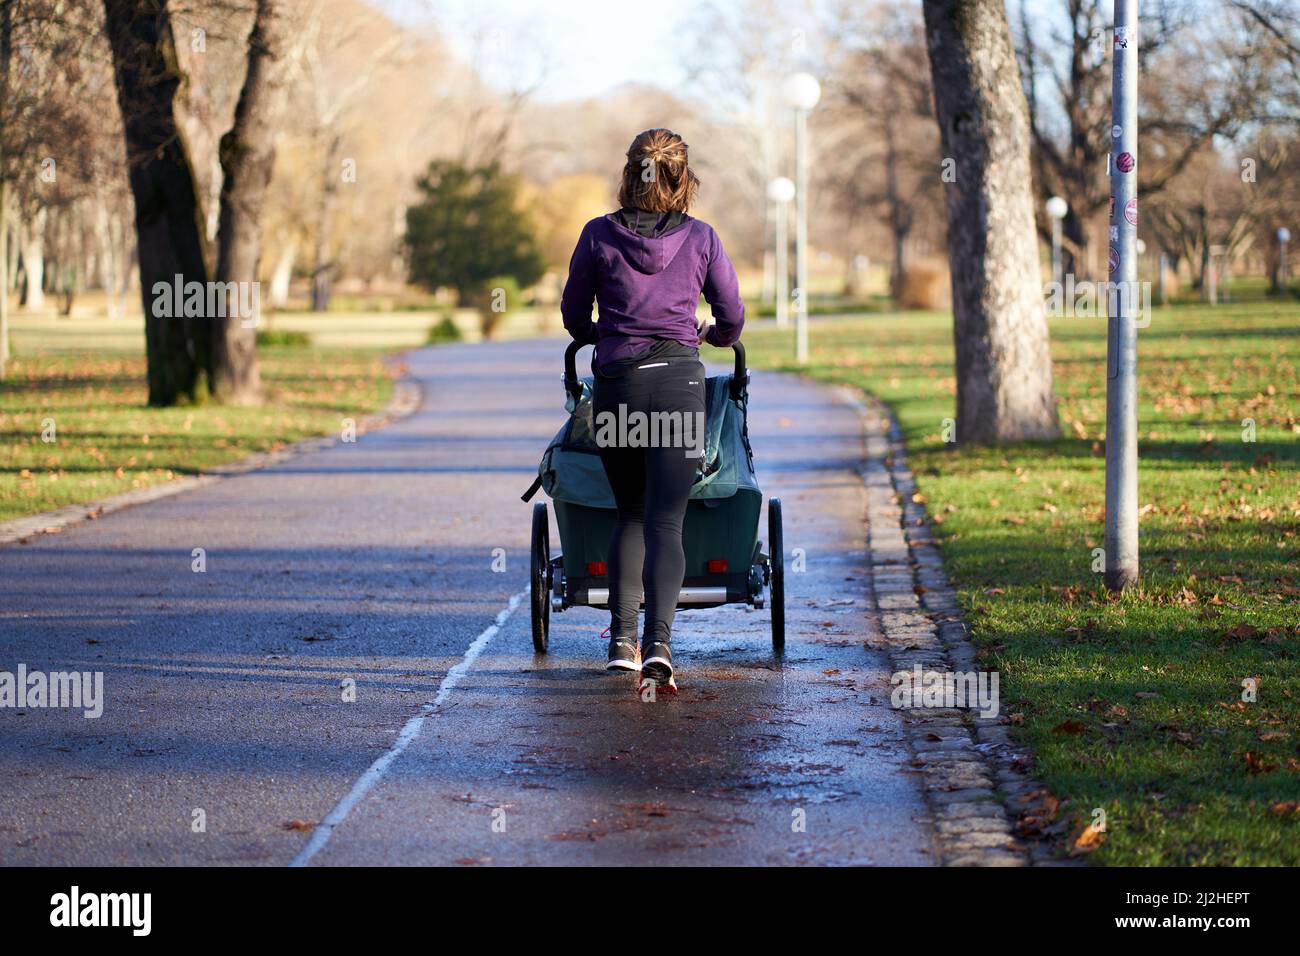 Stuttgart, Germany - December 31, 2021: Young woman with stroller jogging alone in the park. Person with purple training clothes moves in nature. Stock Photo